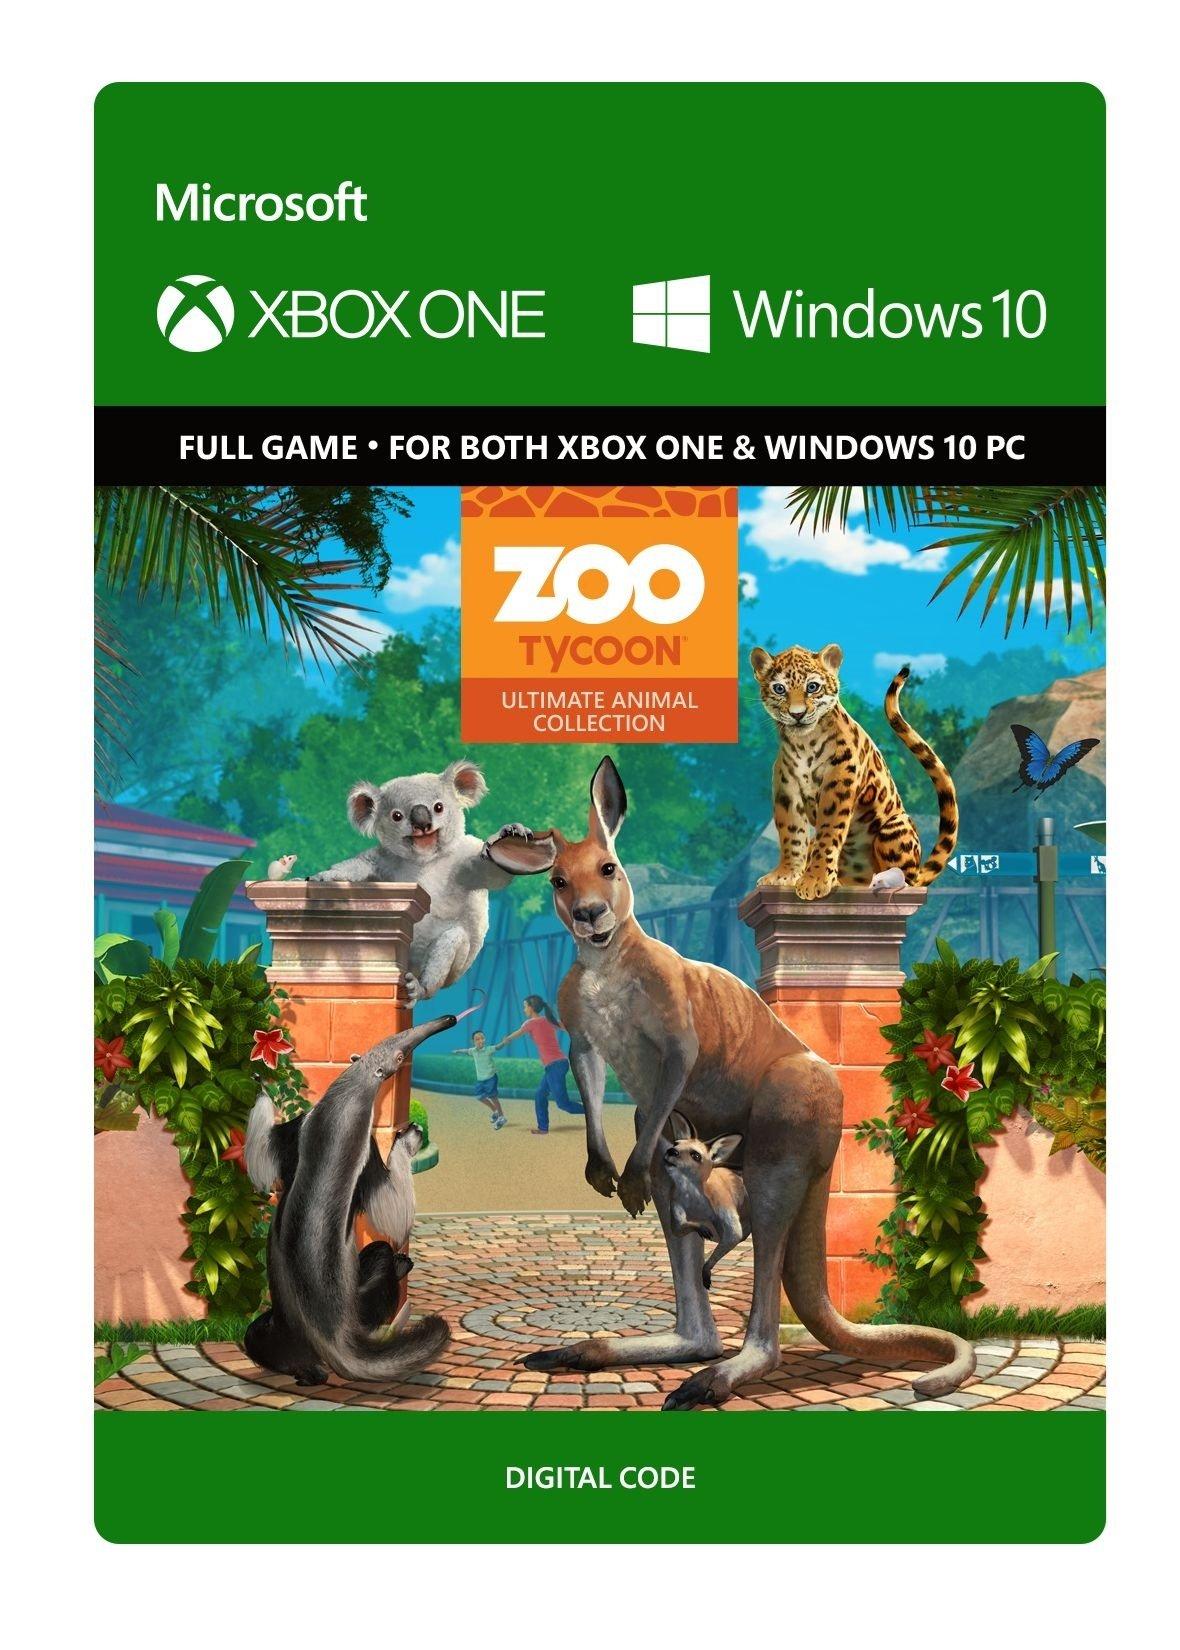 Zoo Tycoon: Ultimate Animal Collection - Xbox One and Win 10 - Game | G7Q-00061 (c3021932-378c-4ef1-bcfd-923c86948530)